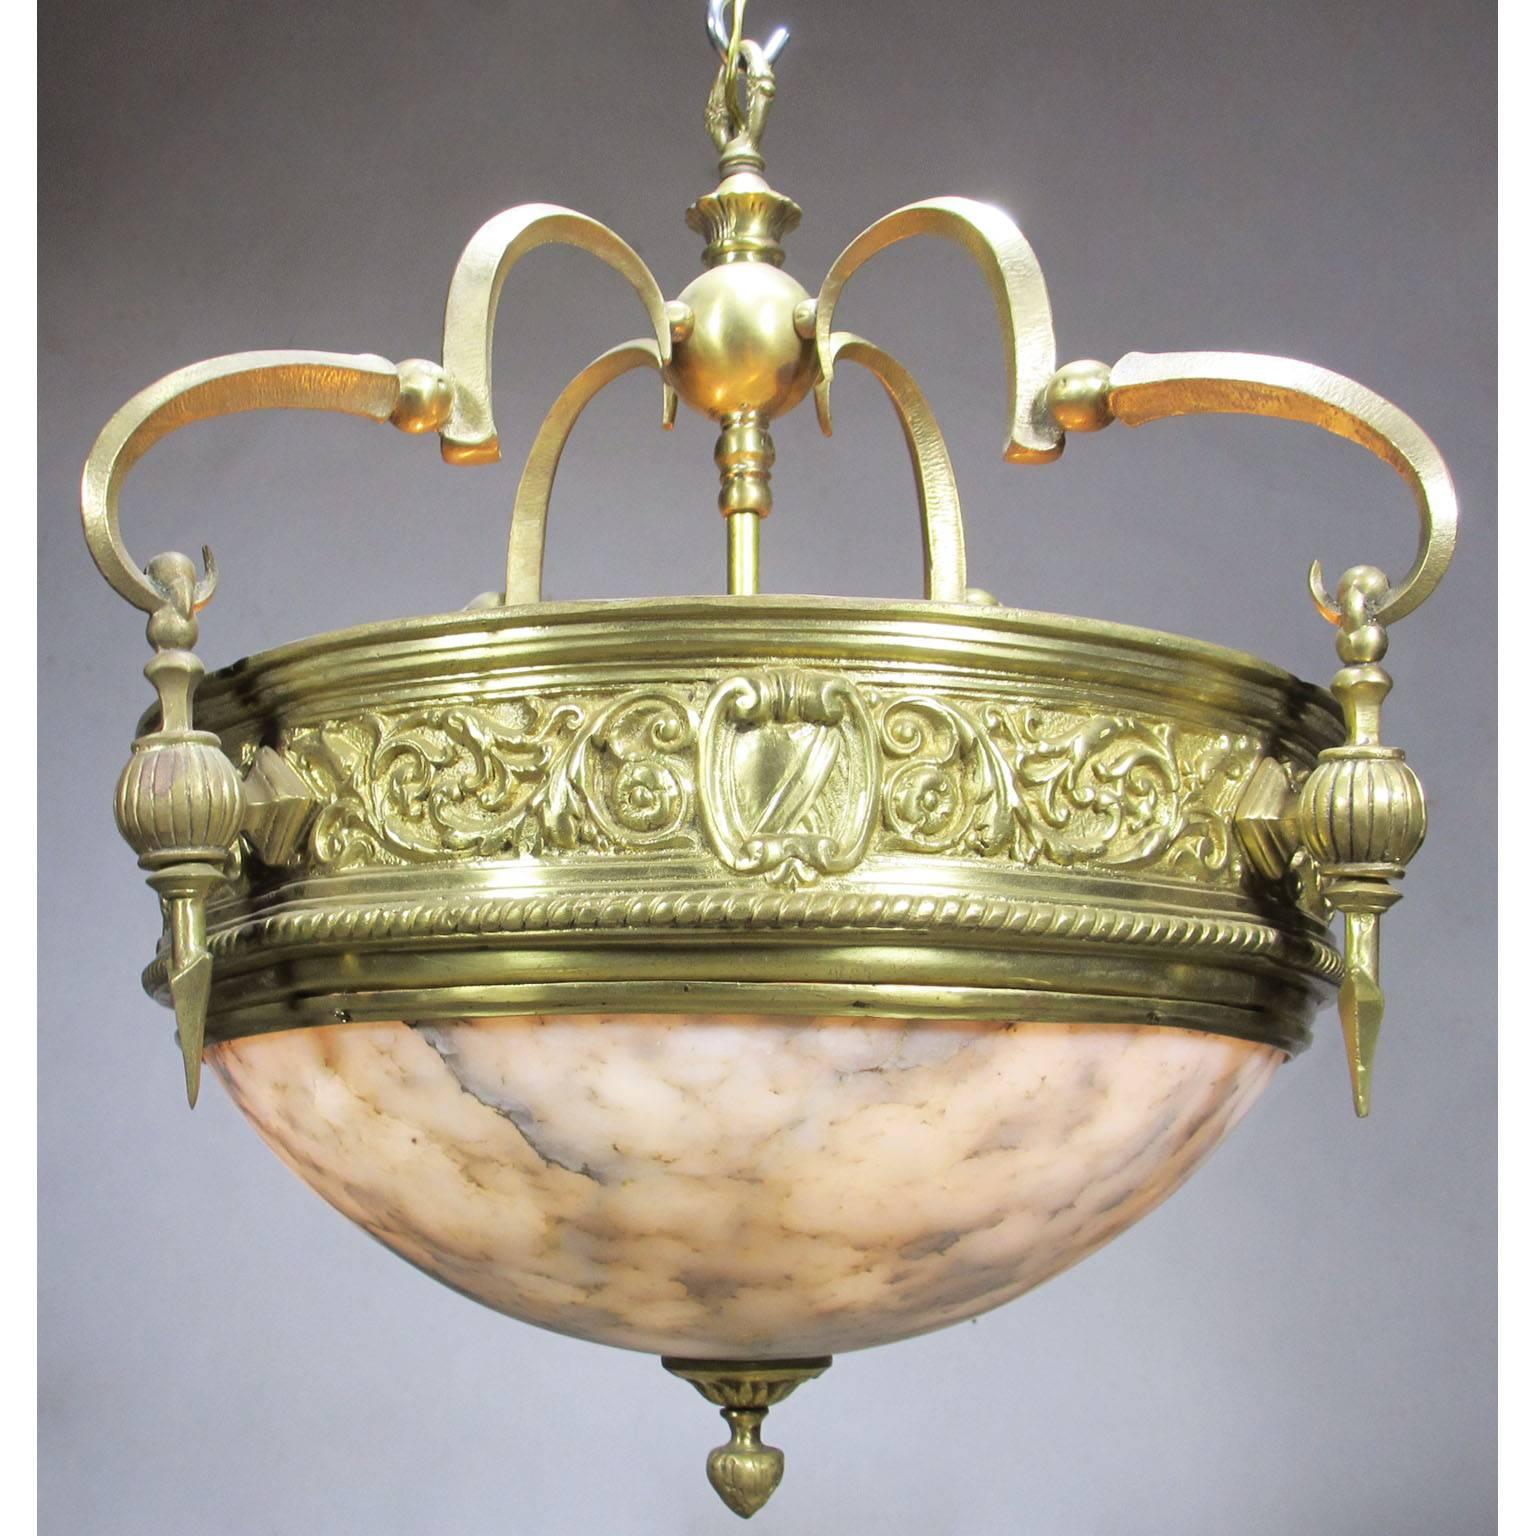 A rare Art-Deco style polished bronze and alabaster three-light hanging plafonnier chandelier. Please note that we have a total of 12 of these plafonnier chandeliers available. The veining on the alabaster will vary on the others, but they were all